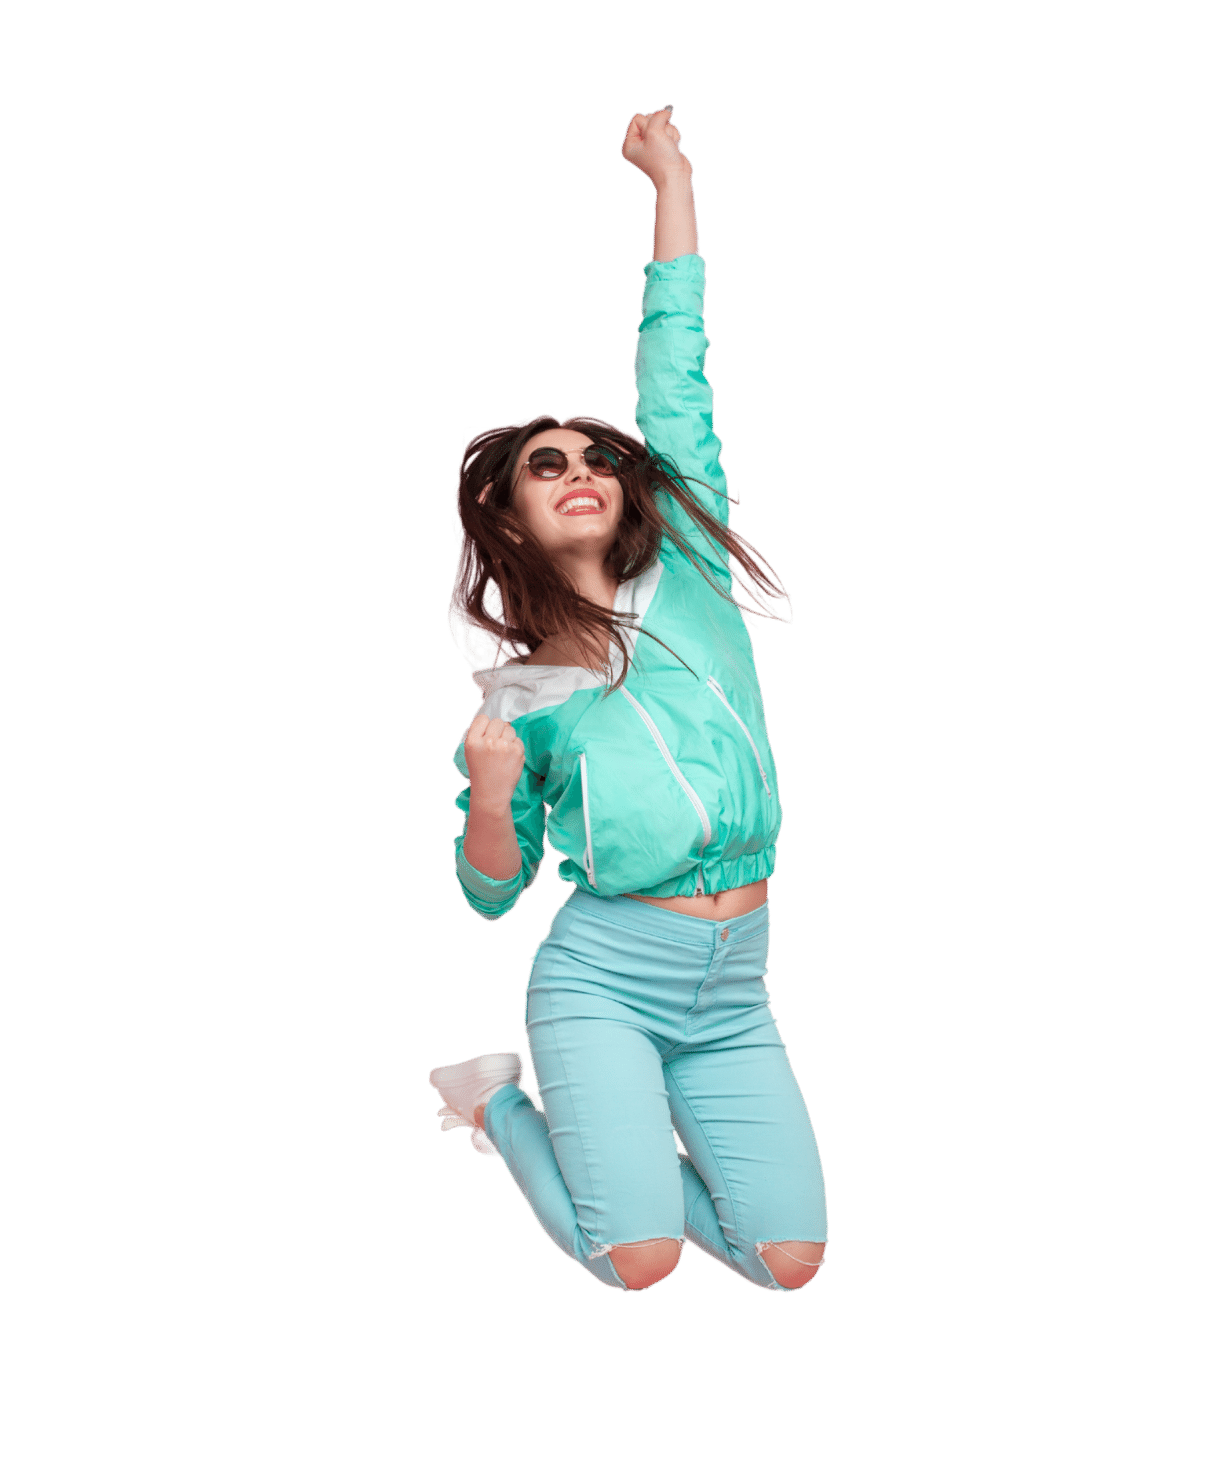 Woman in green hoodie and sunglasses jumping into air with one hand raised and smile on her face